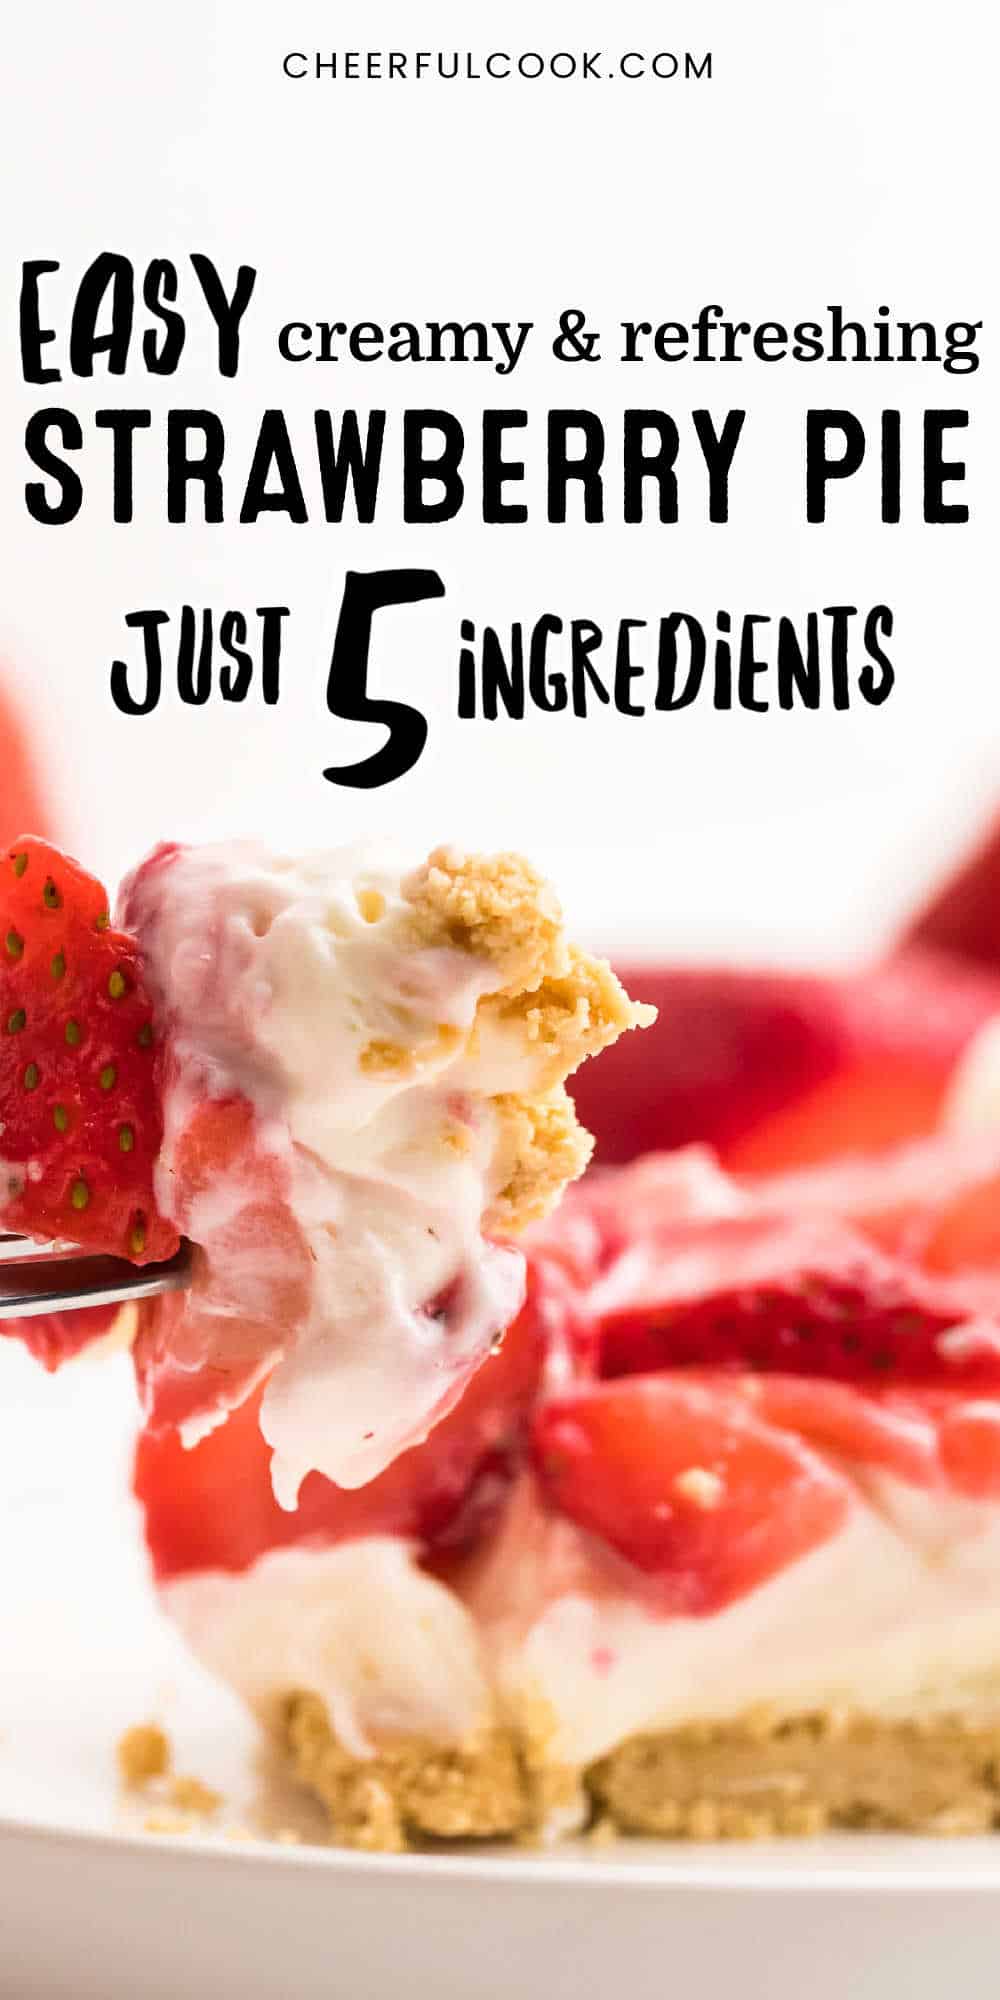 This no-bake Strawberry Pie combines the sweet flavors of fresh strawberries with a deliciously sweet and tangy cream filling. Easy Strawberry Pie Recipe | Strawberry Cream Pie #cheerfulcook #strawberrypie #creampie #5ingredients #best #dessert via @cheerfulcook